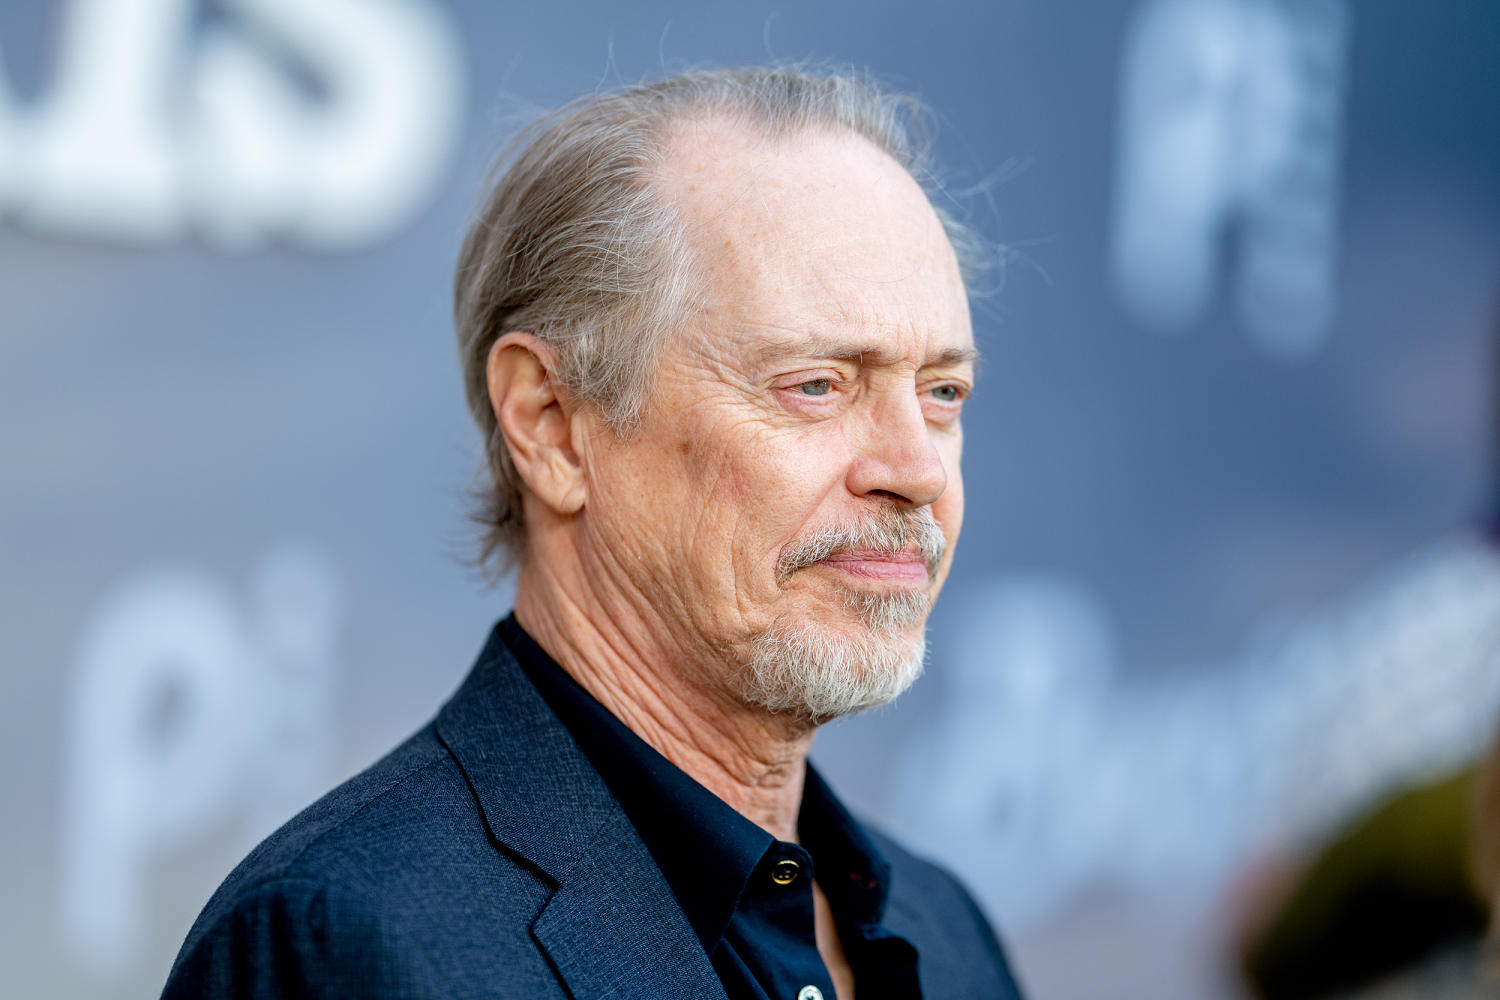 Man accused of sucker-punching Steve Buscemi on NYC street is arrested 